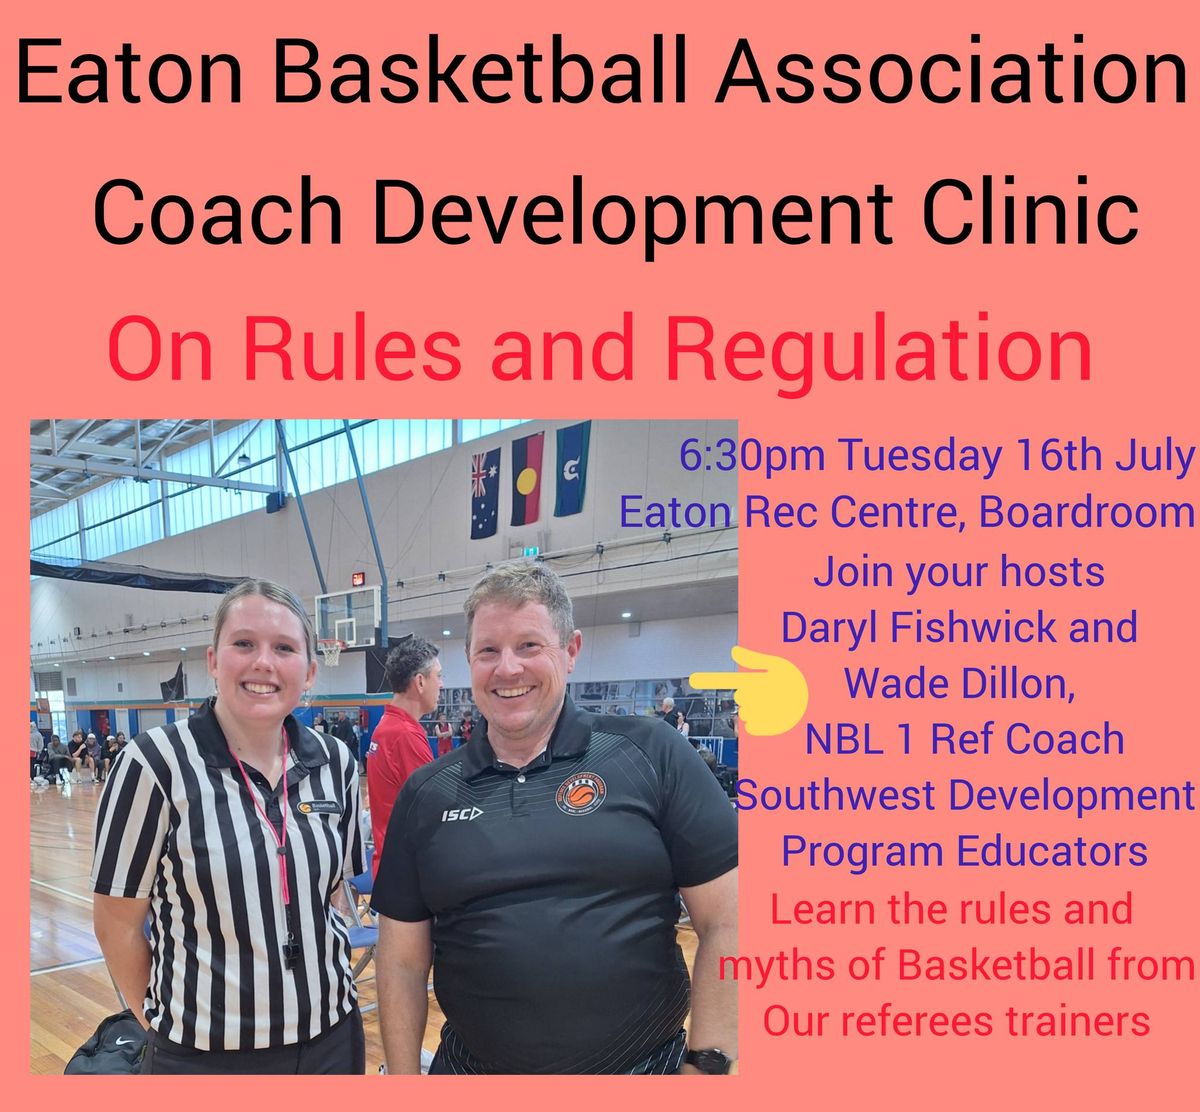 Coach Development Clinic - Rules and Regulations